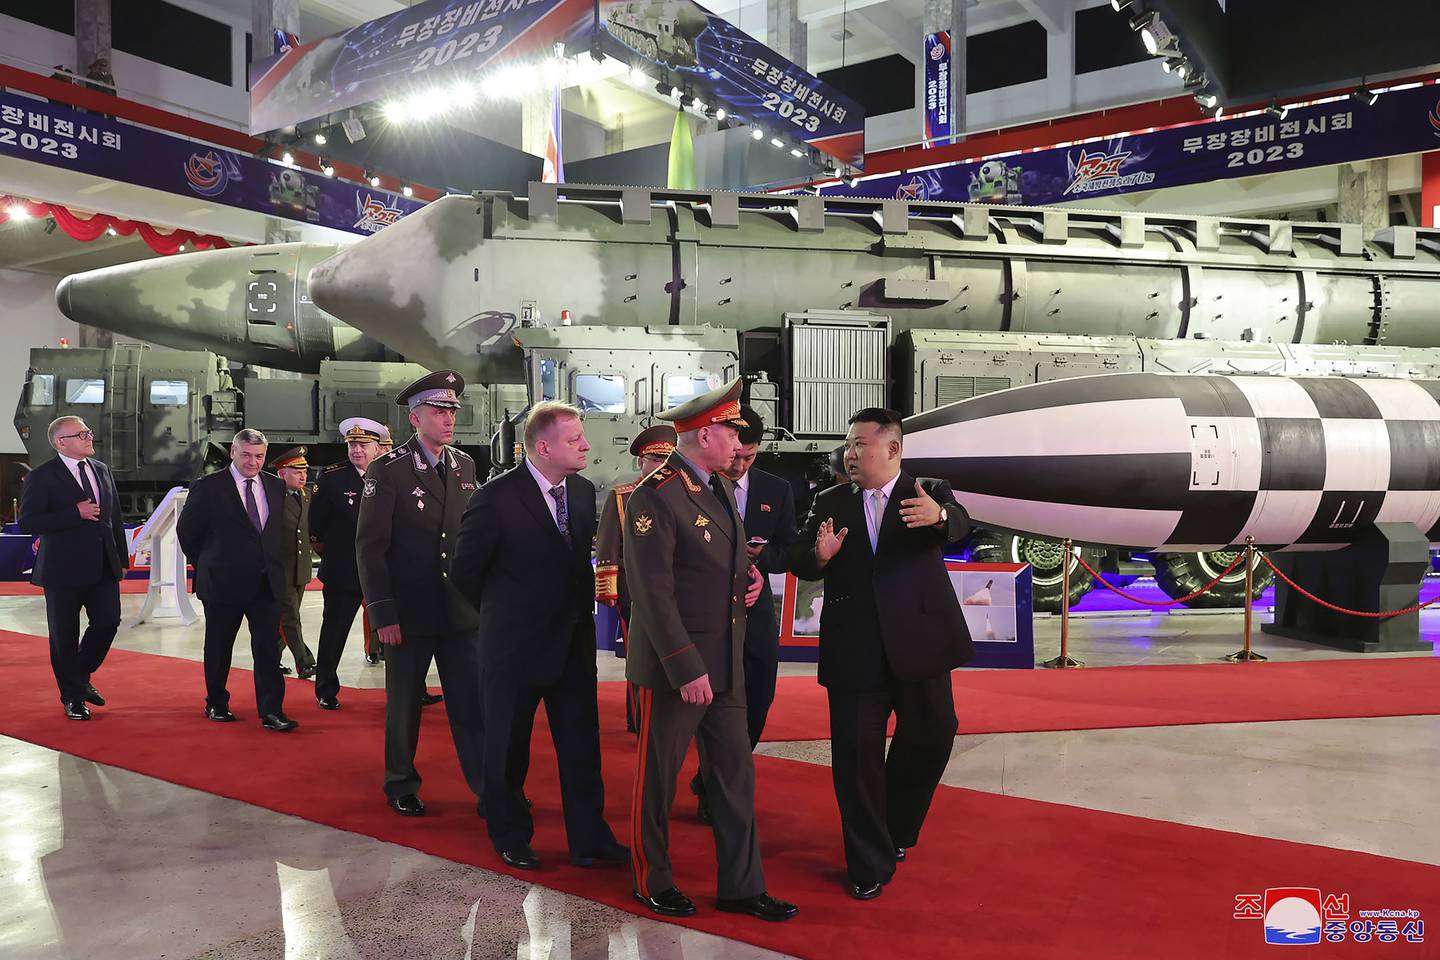 In this photo provided by the North Korean government, North Korean leader Kim Jong Un, right, with Russian delegation led by its Defense Minister Sergei Shoigu visits an arms exhibition in Pyongyang, North Korea Wednesday, July 26, 2023, on the occasion of the 70th anniversary of the armistice that halted fighting in the 1950-53 Korean War.